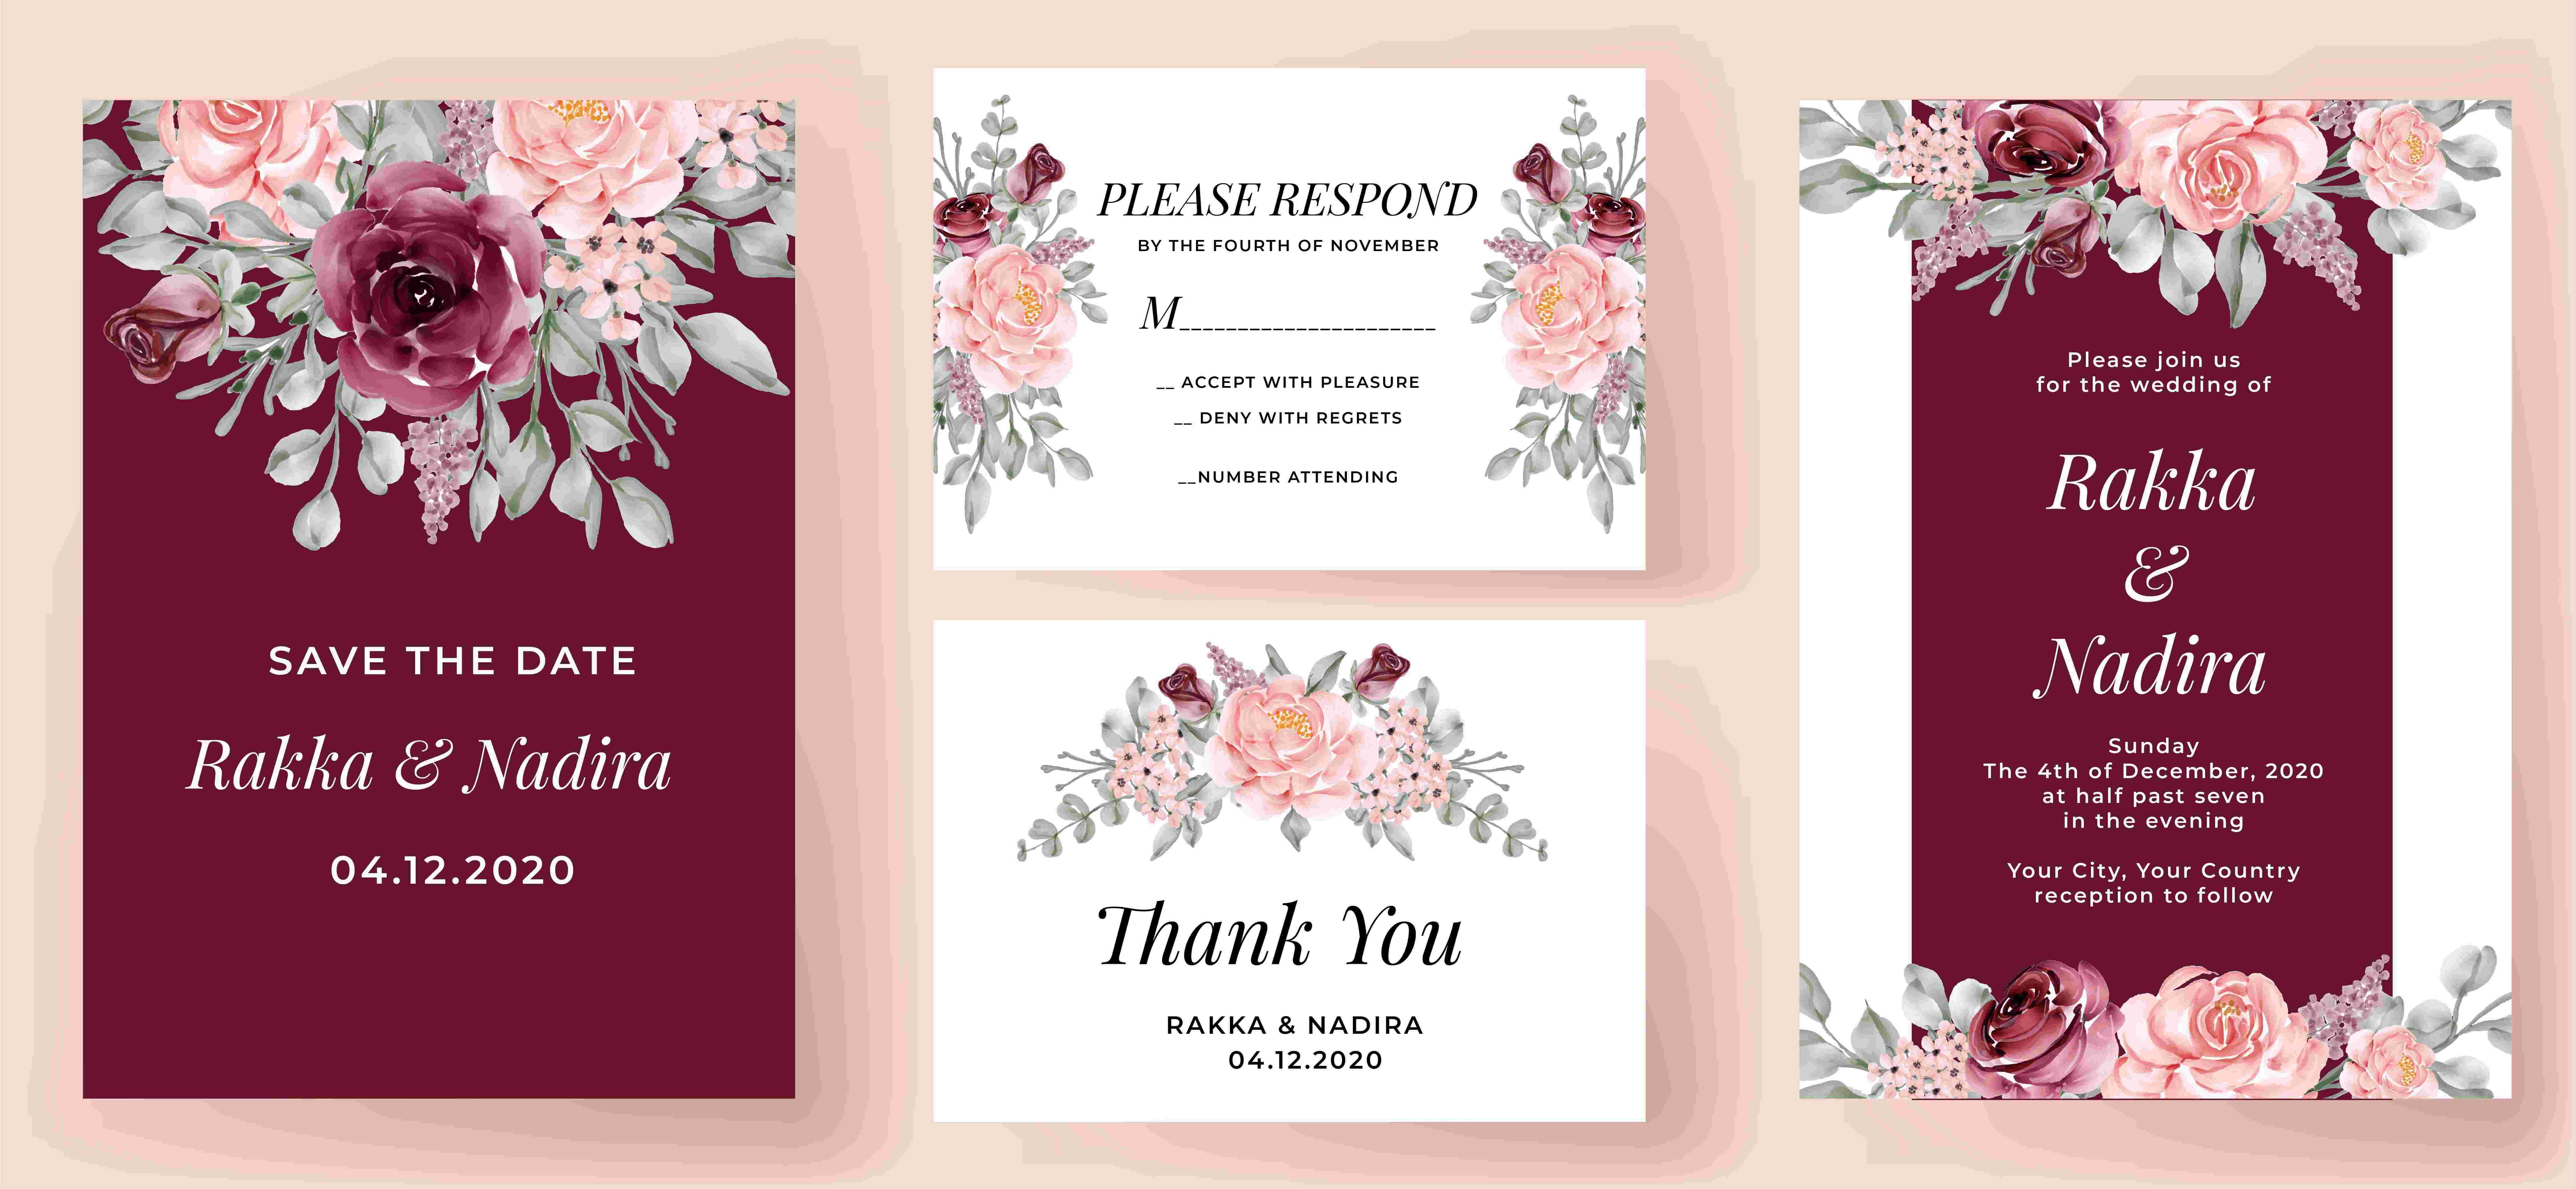 Great template for your invitations.